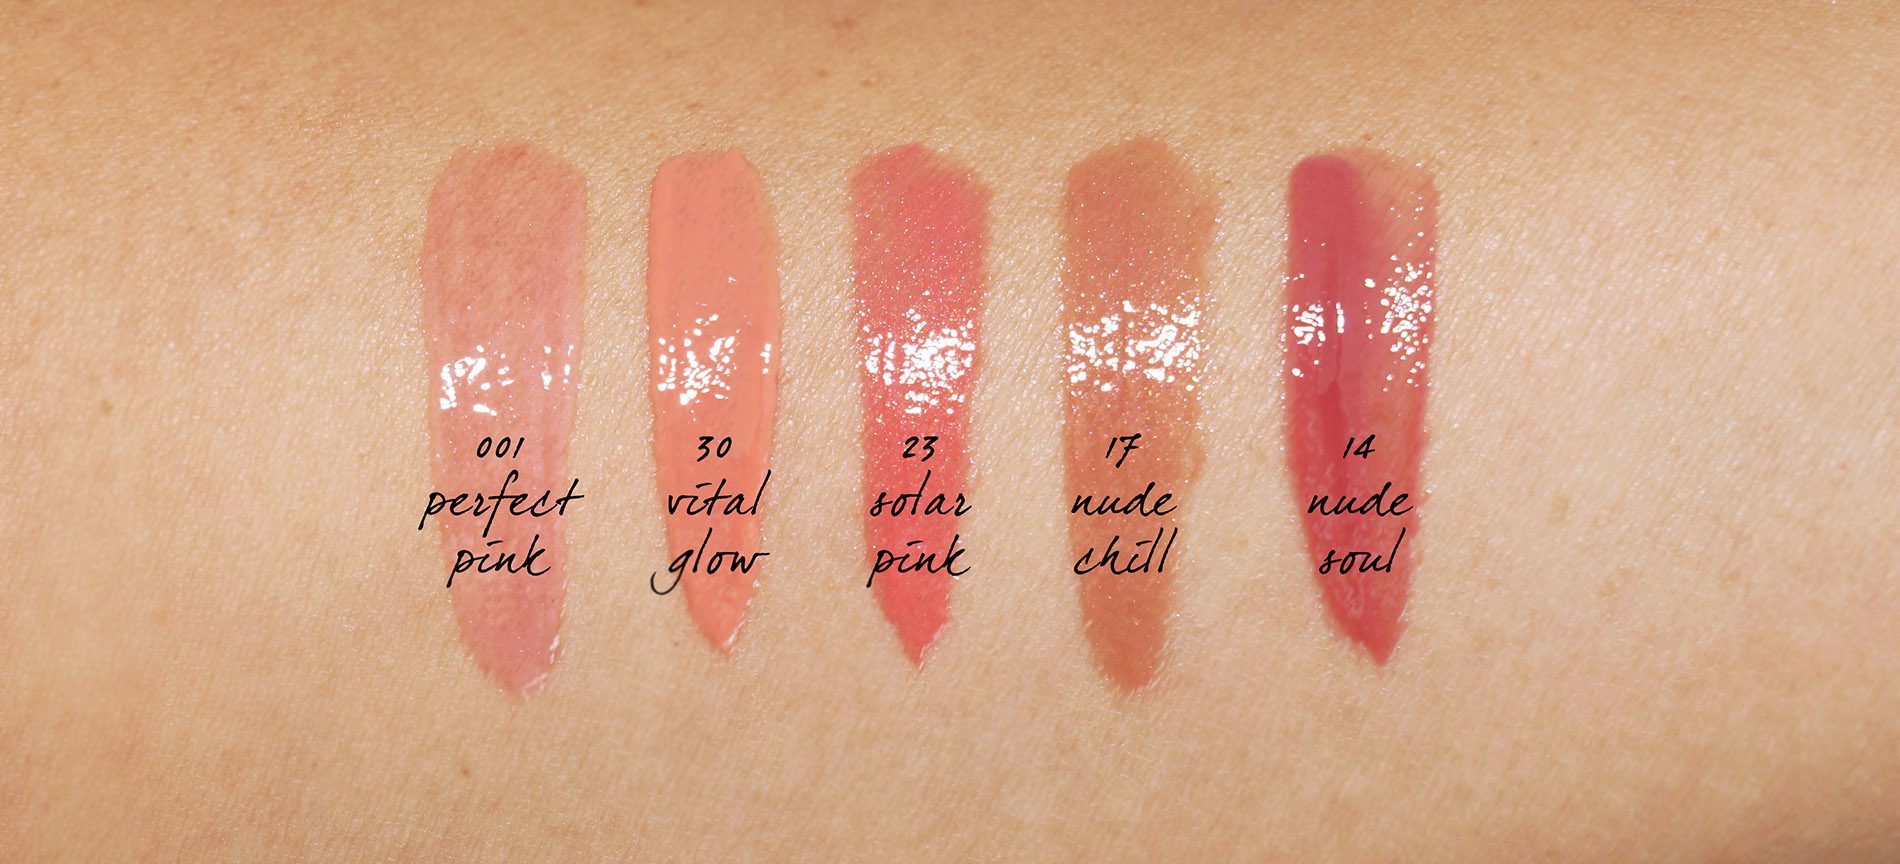 givenchy le rose perfecto swatch